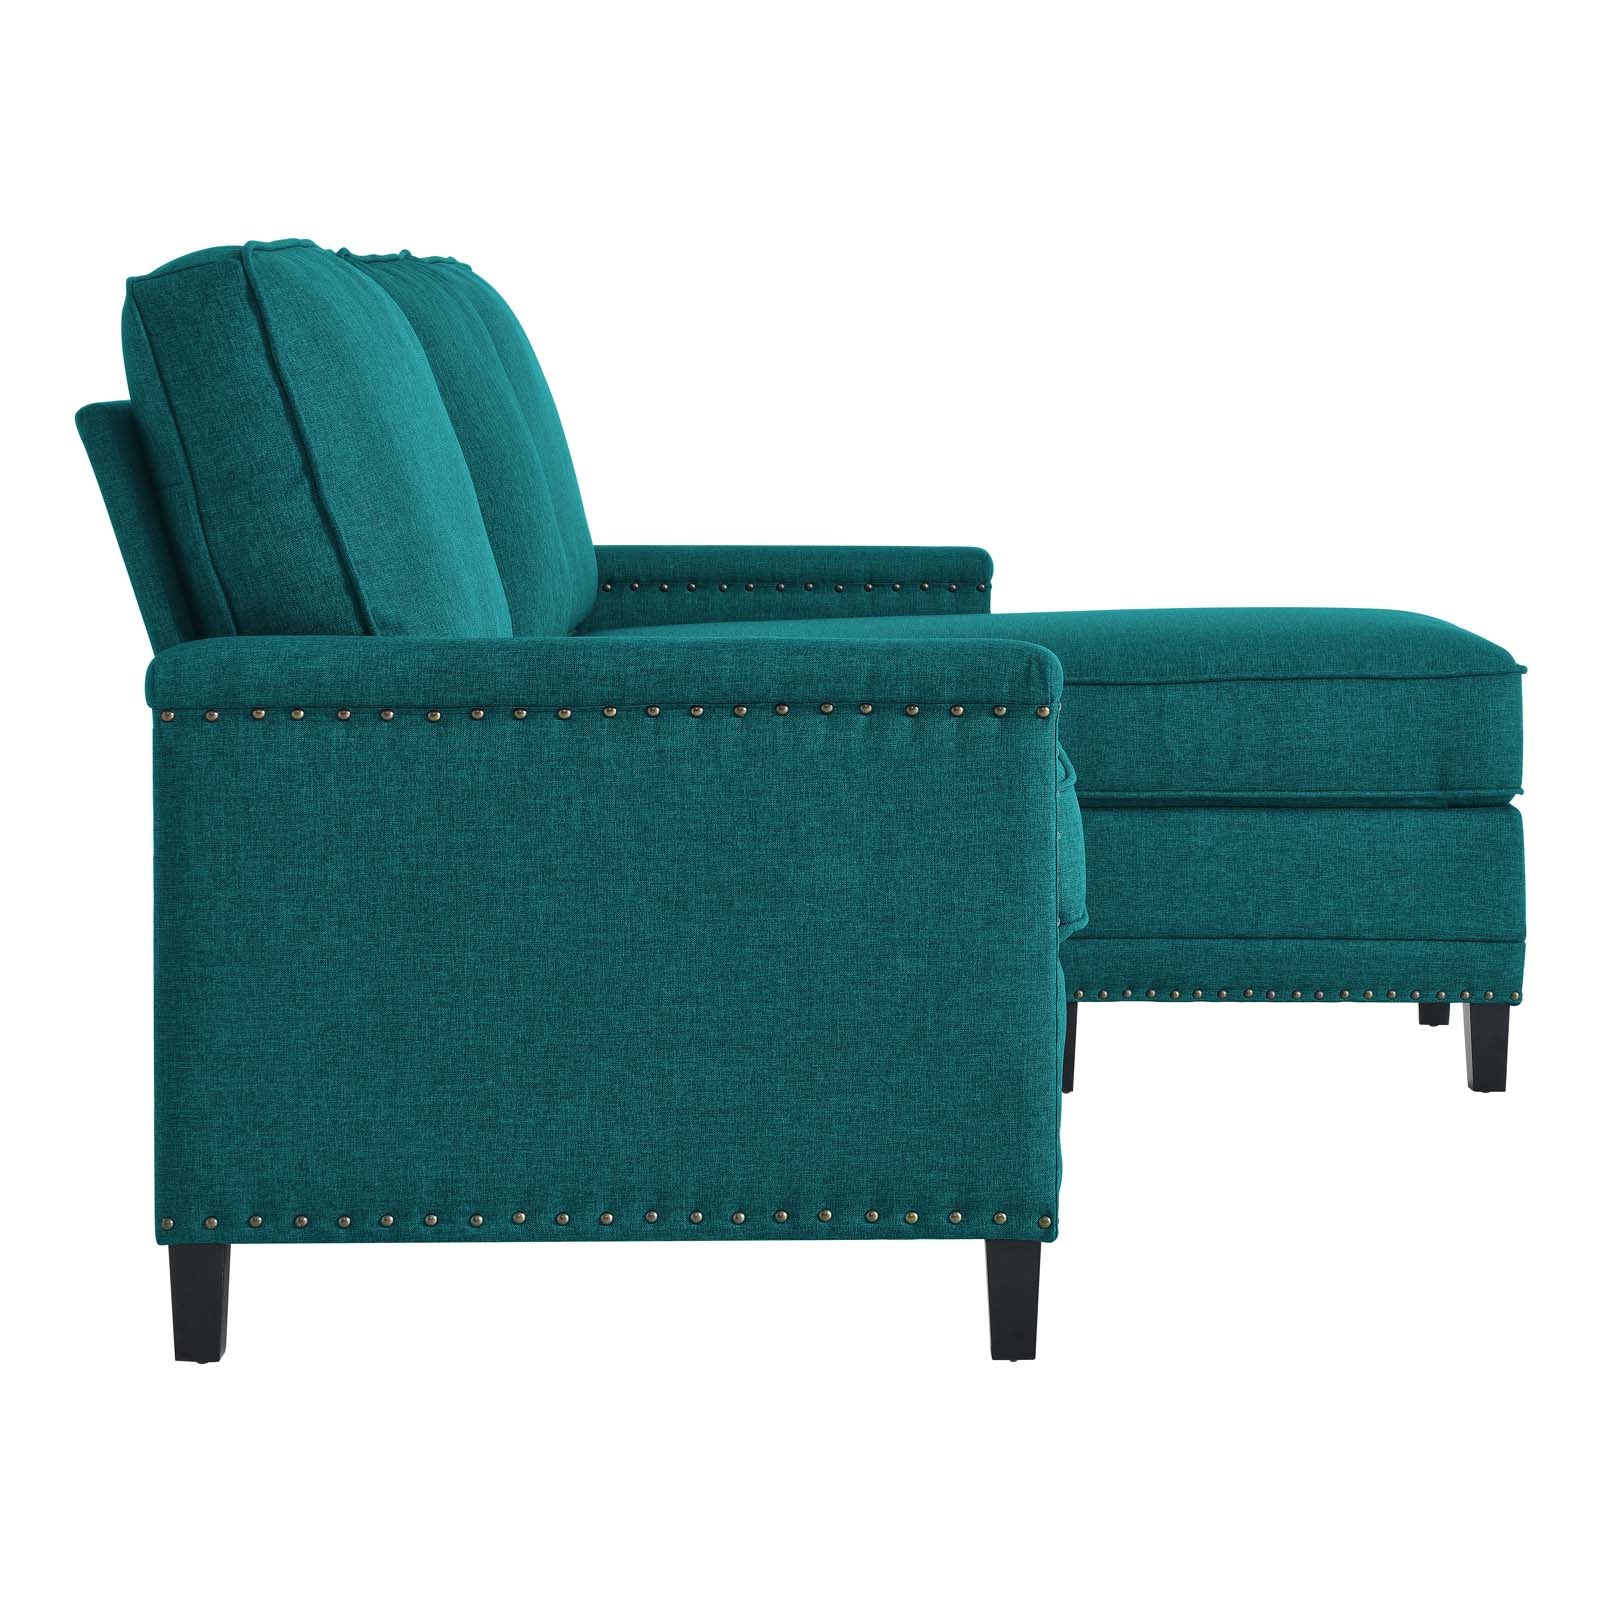 Modway Sectional Sofas - Ashton Upholstered Fabric Sectional Sofa Teal